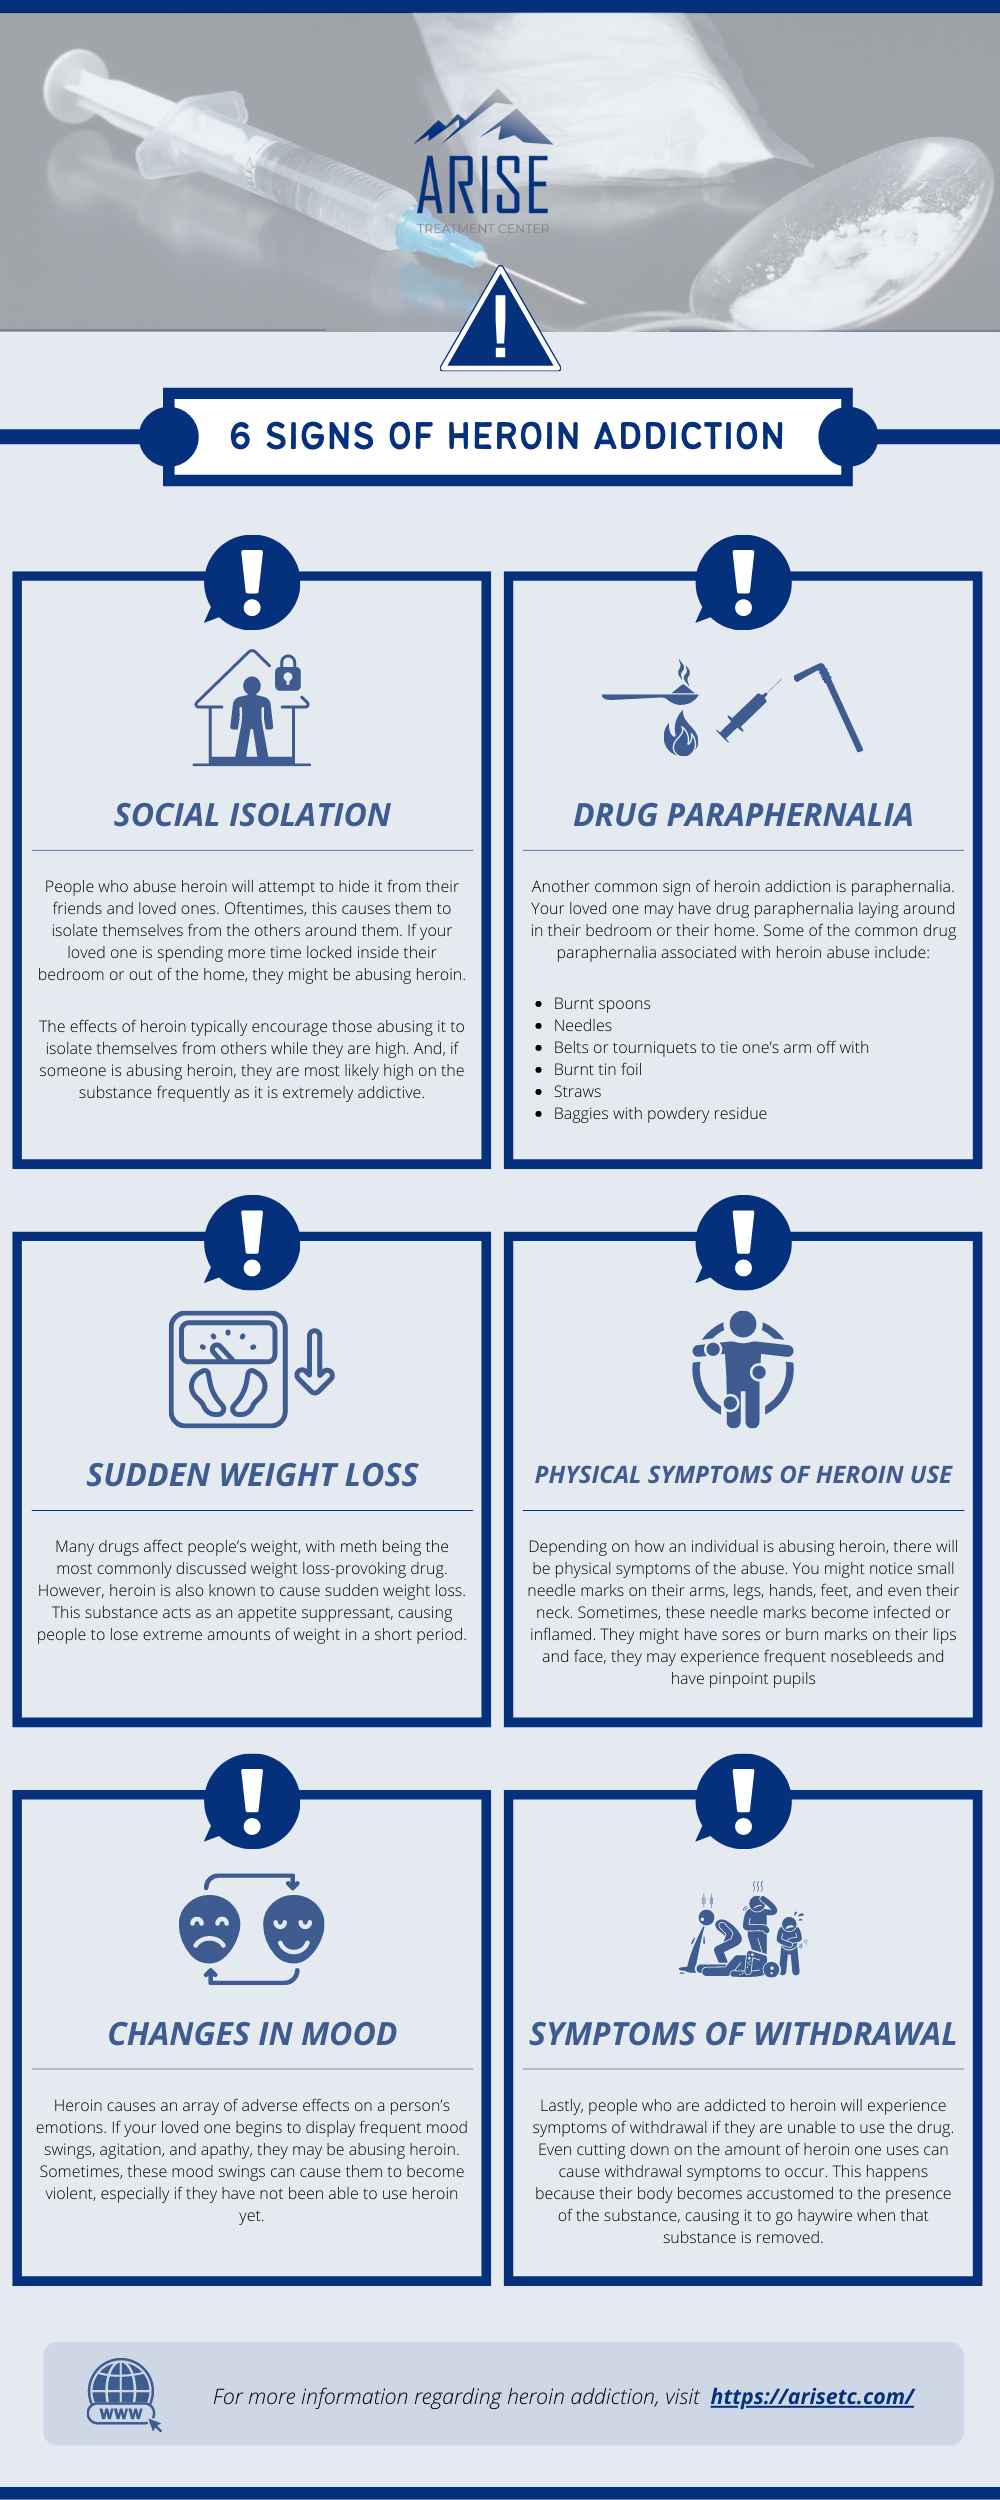 6 Signs of Heroin Addiction